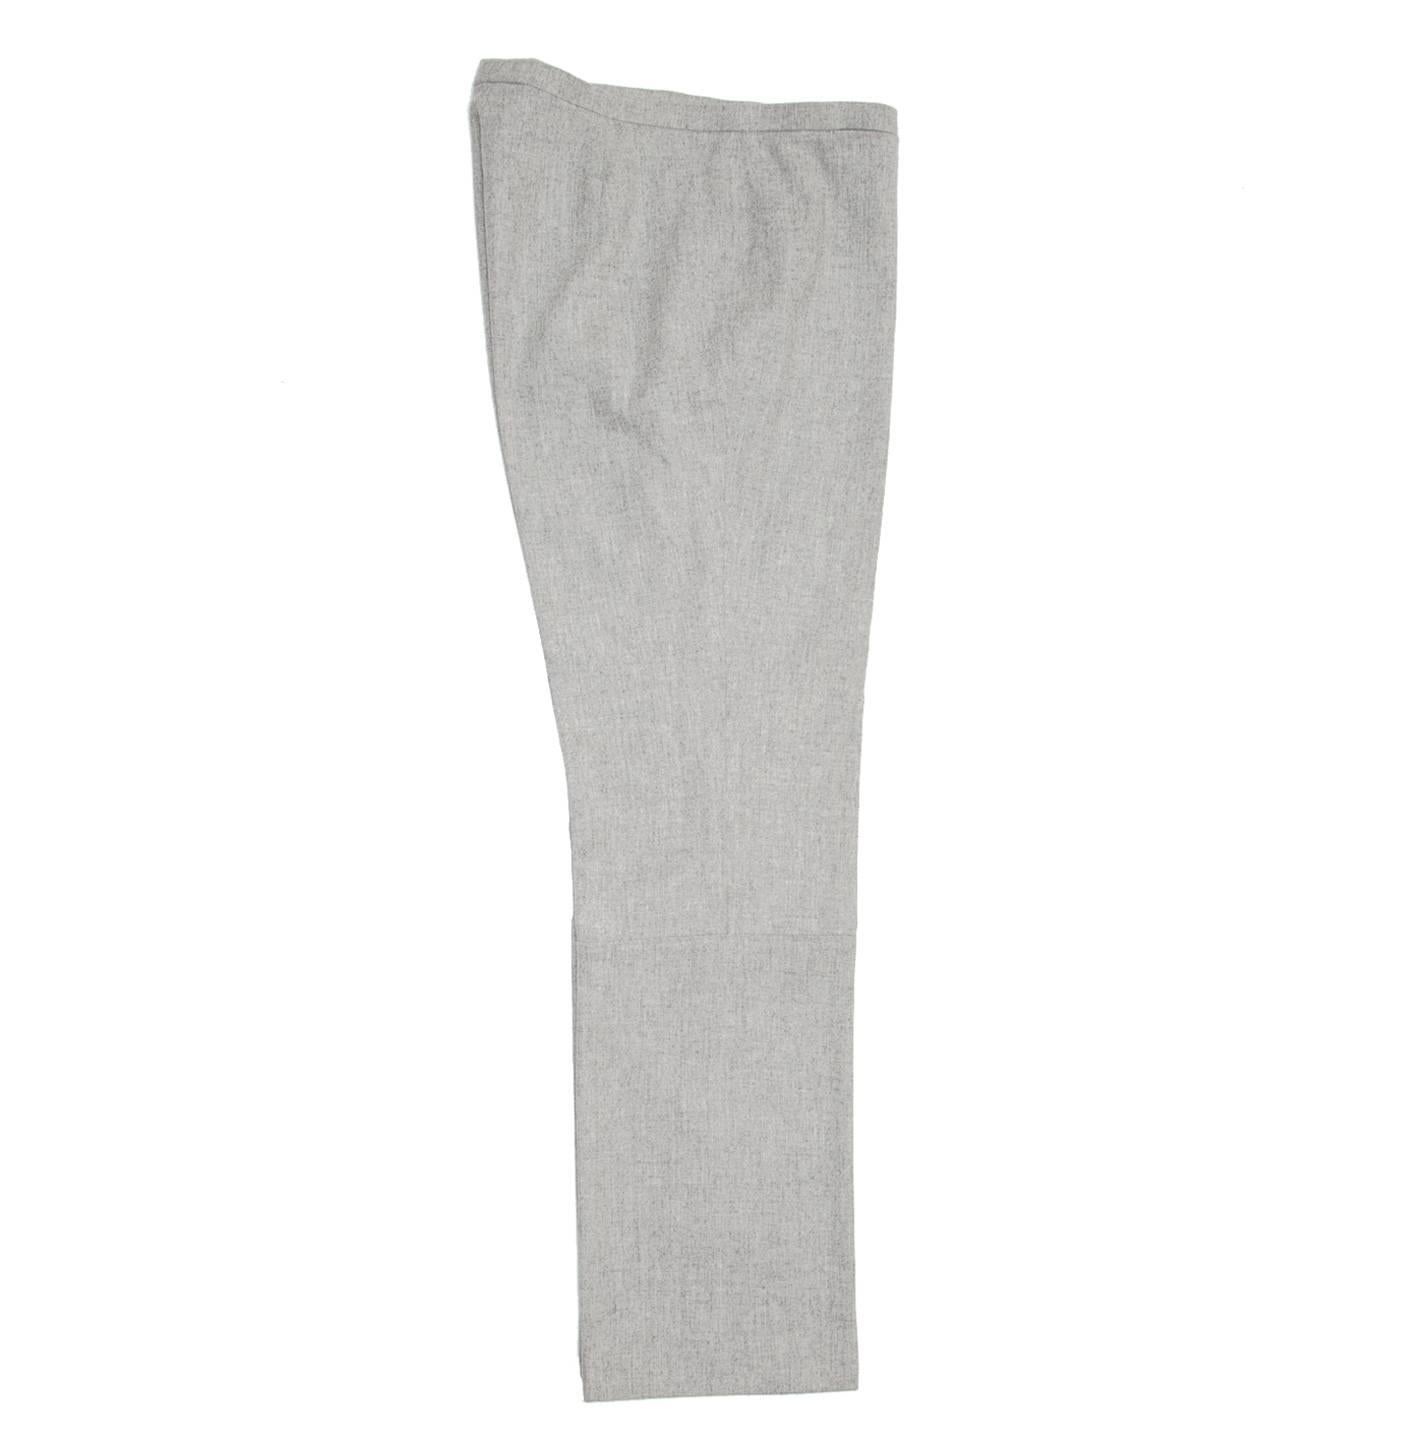 Jil Sander Grey Wool Classic Pants In Excellent Condition For Sale In Brooklyn, NY